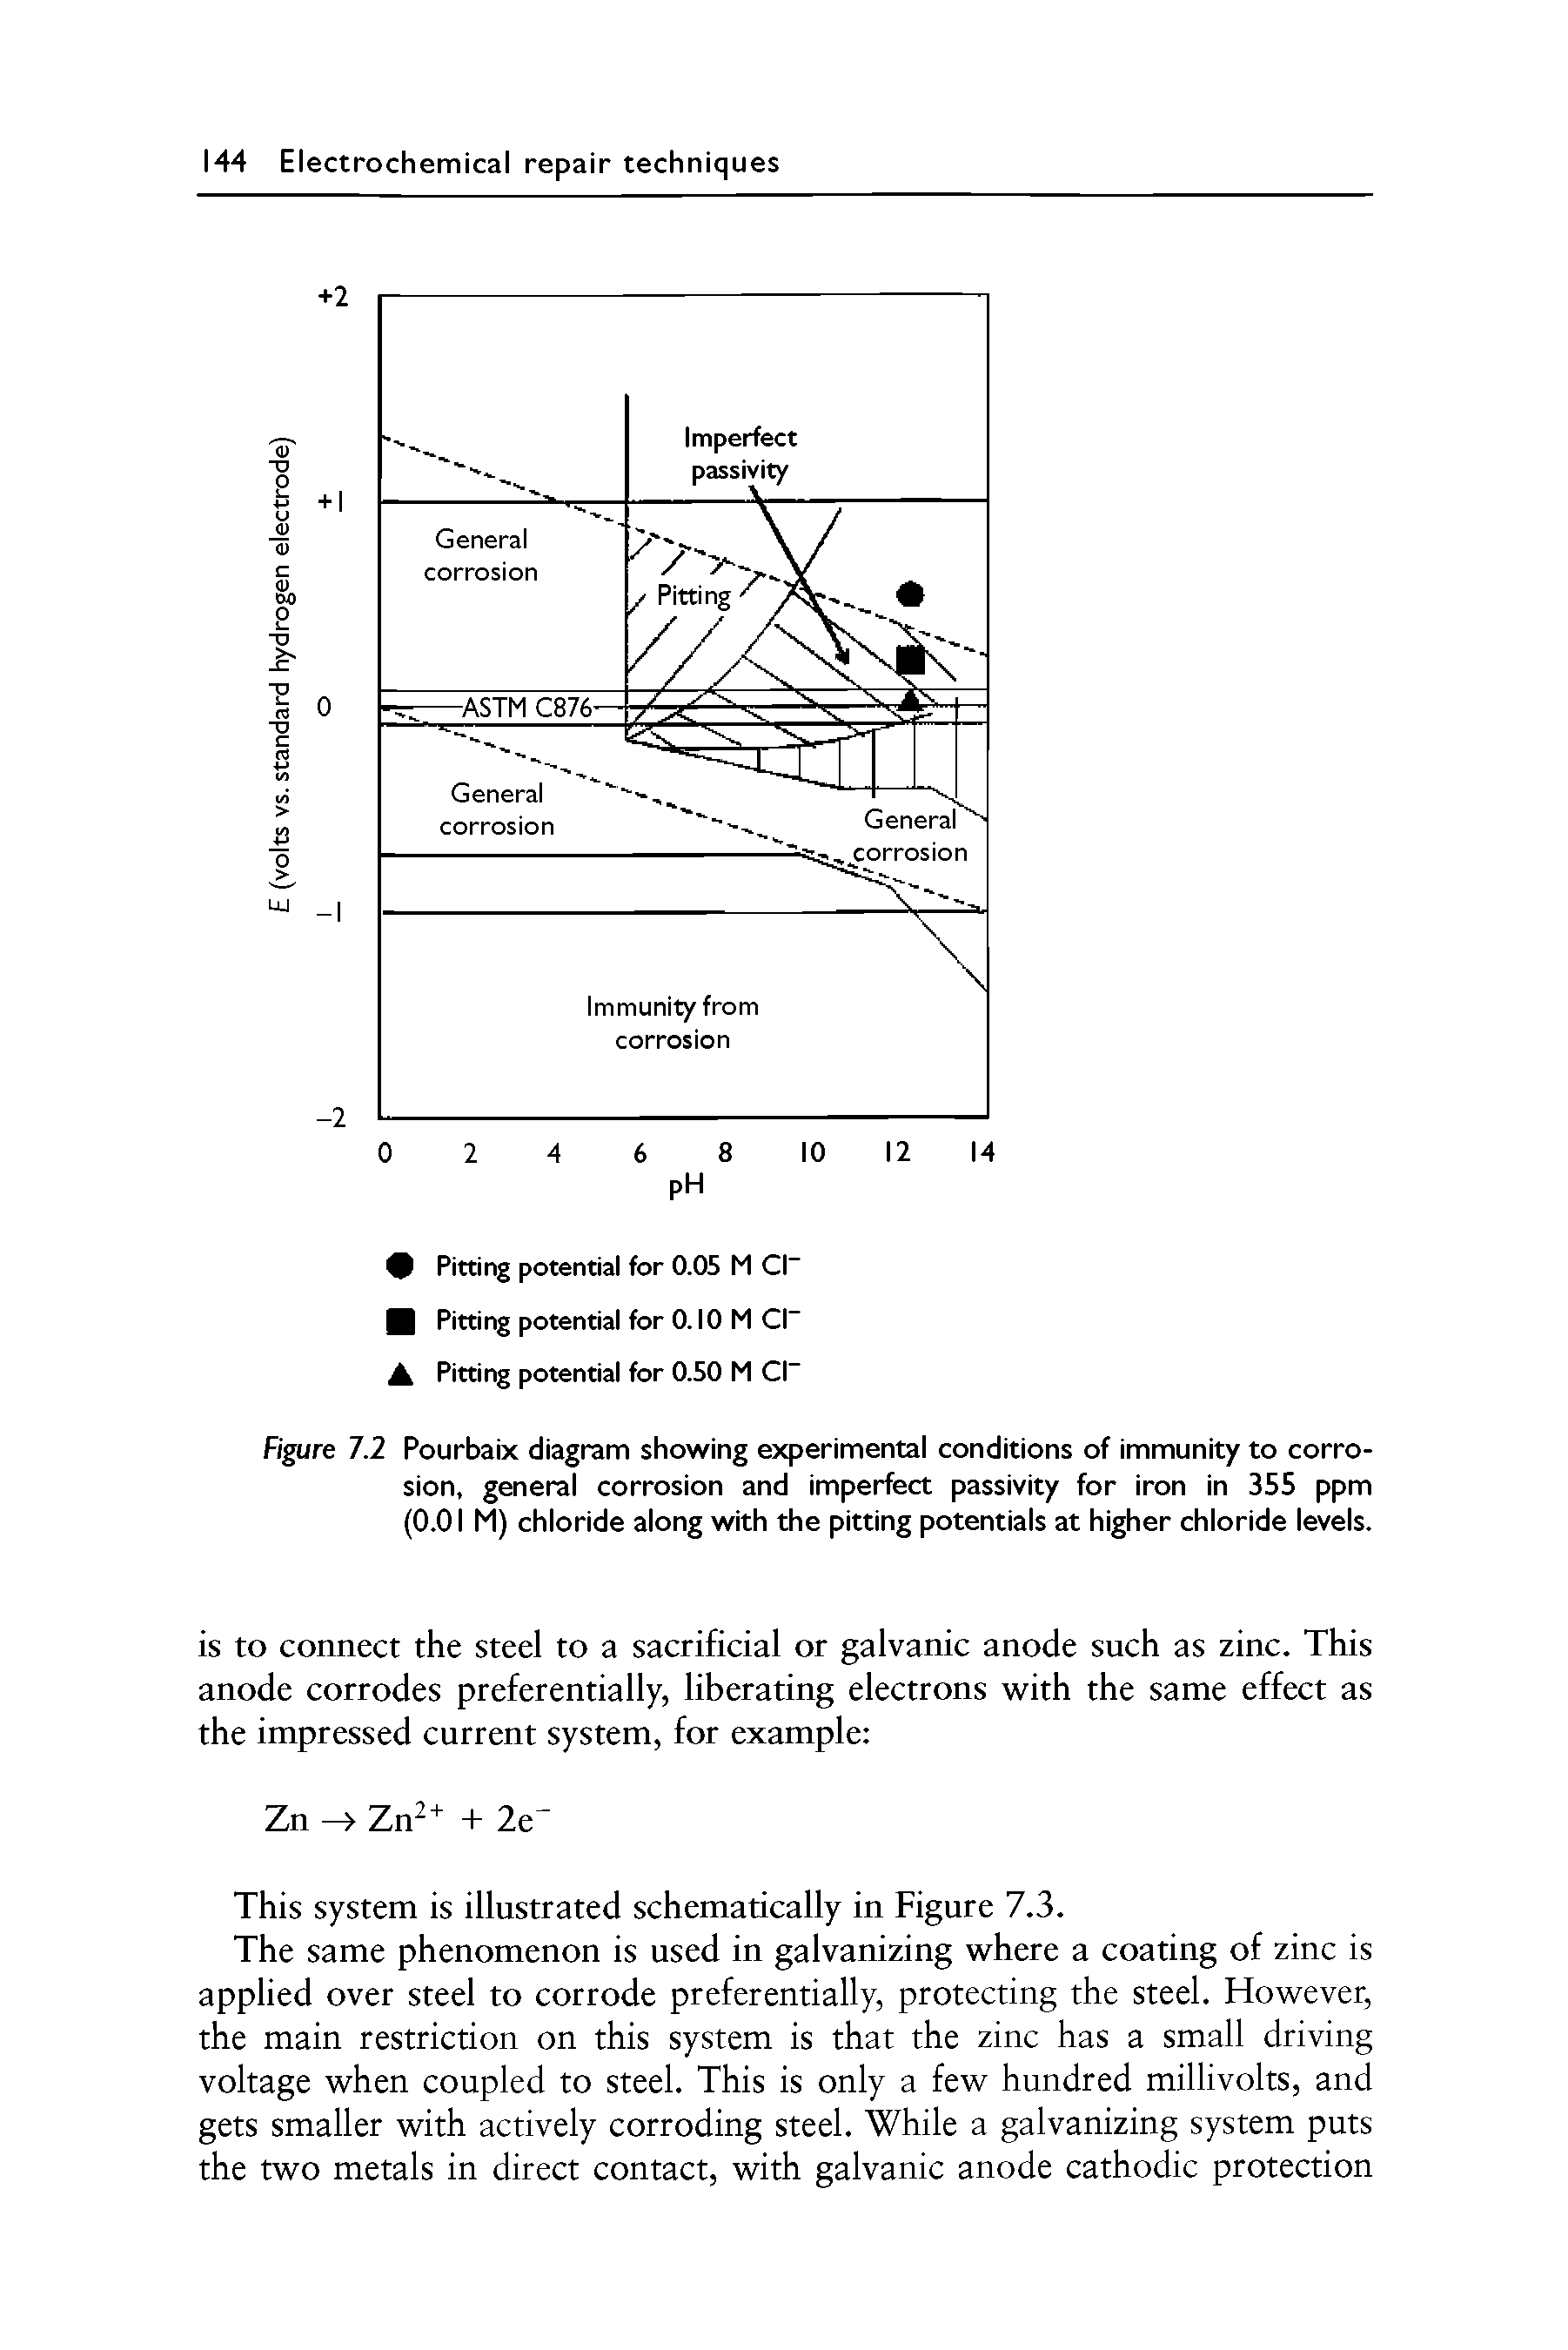 Figure 7.2 Pourbaix diagram showing experimental conditions of immunity to corrosion, general corrosion and imperfect passivity for iron in 355 ppm (0.01 M) chloride along with the pitting potentials at higher chloride levels.